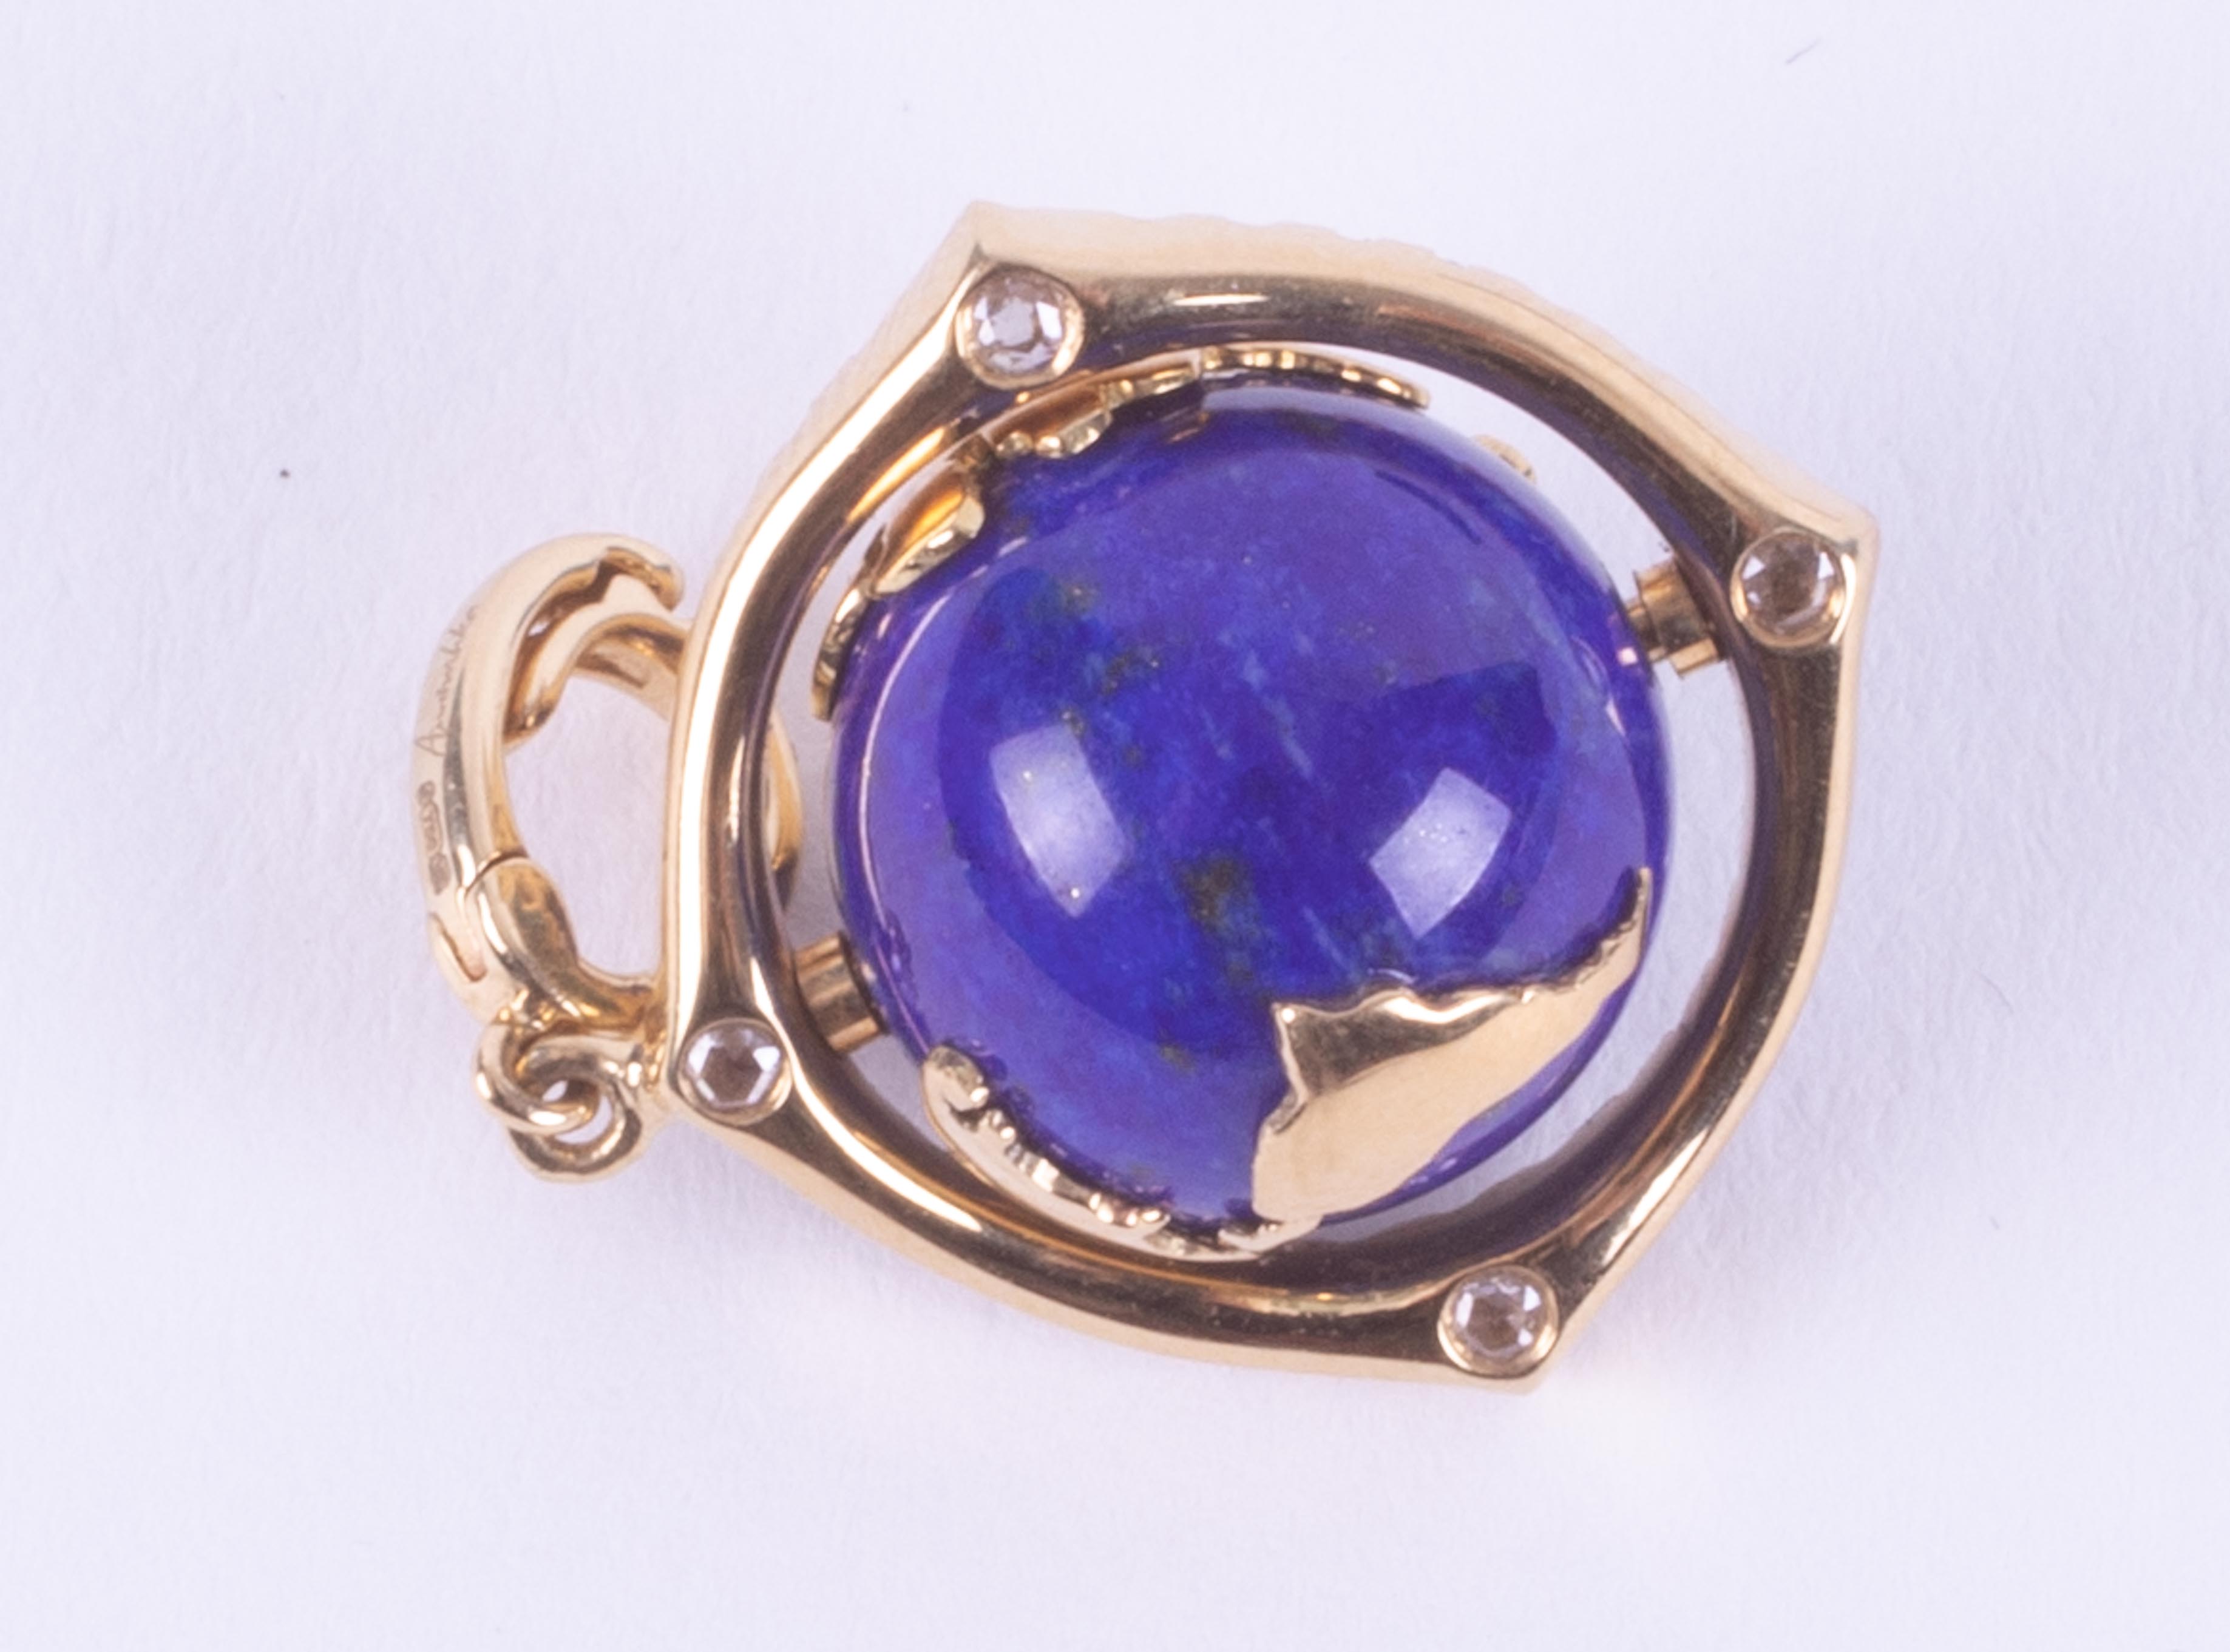 An 18ct yellow gold pendant set with a spinning lapis lazuli & gold 'World' surrounded by small - Image 6 of 7